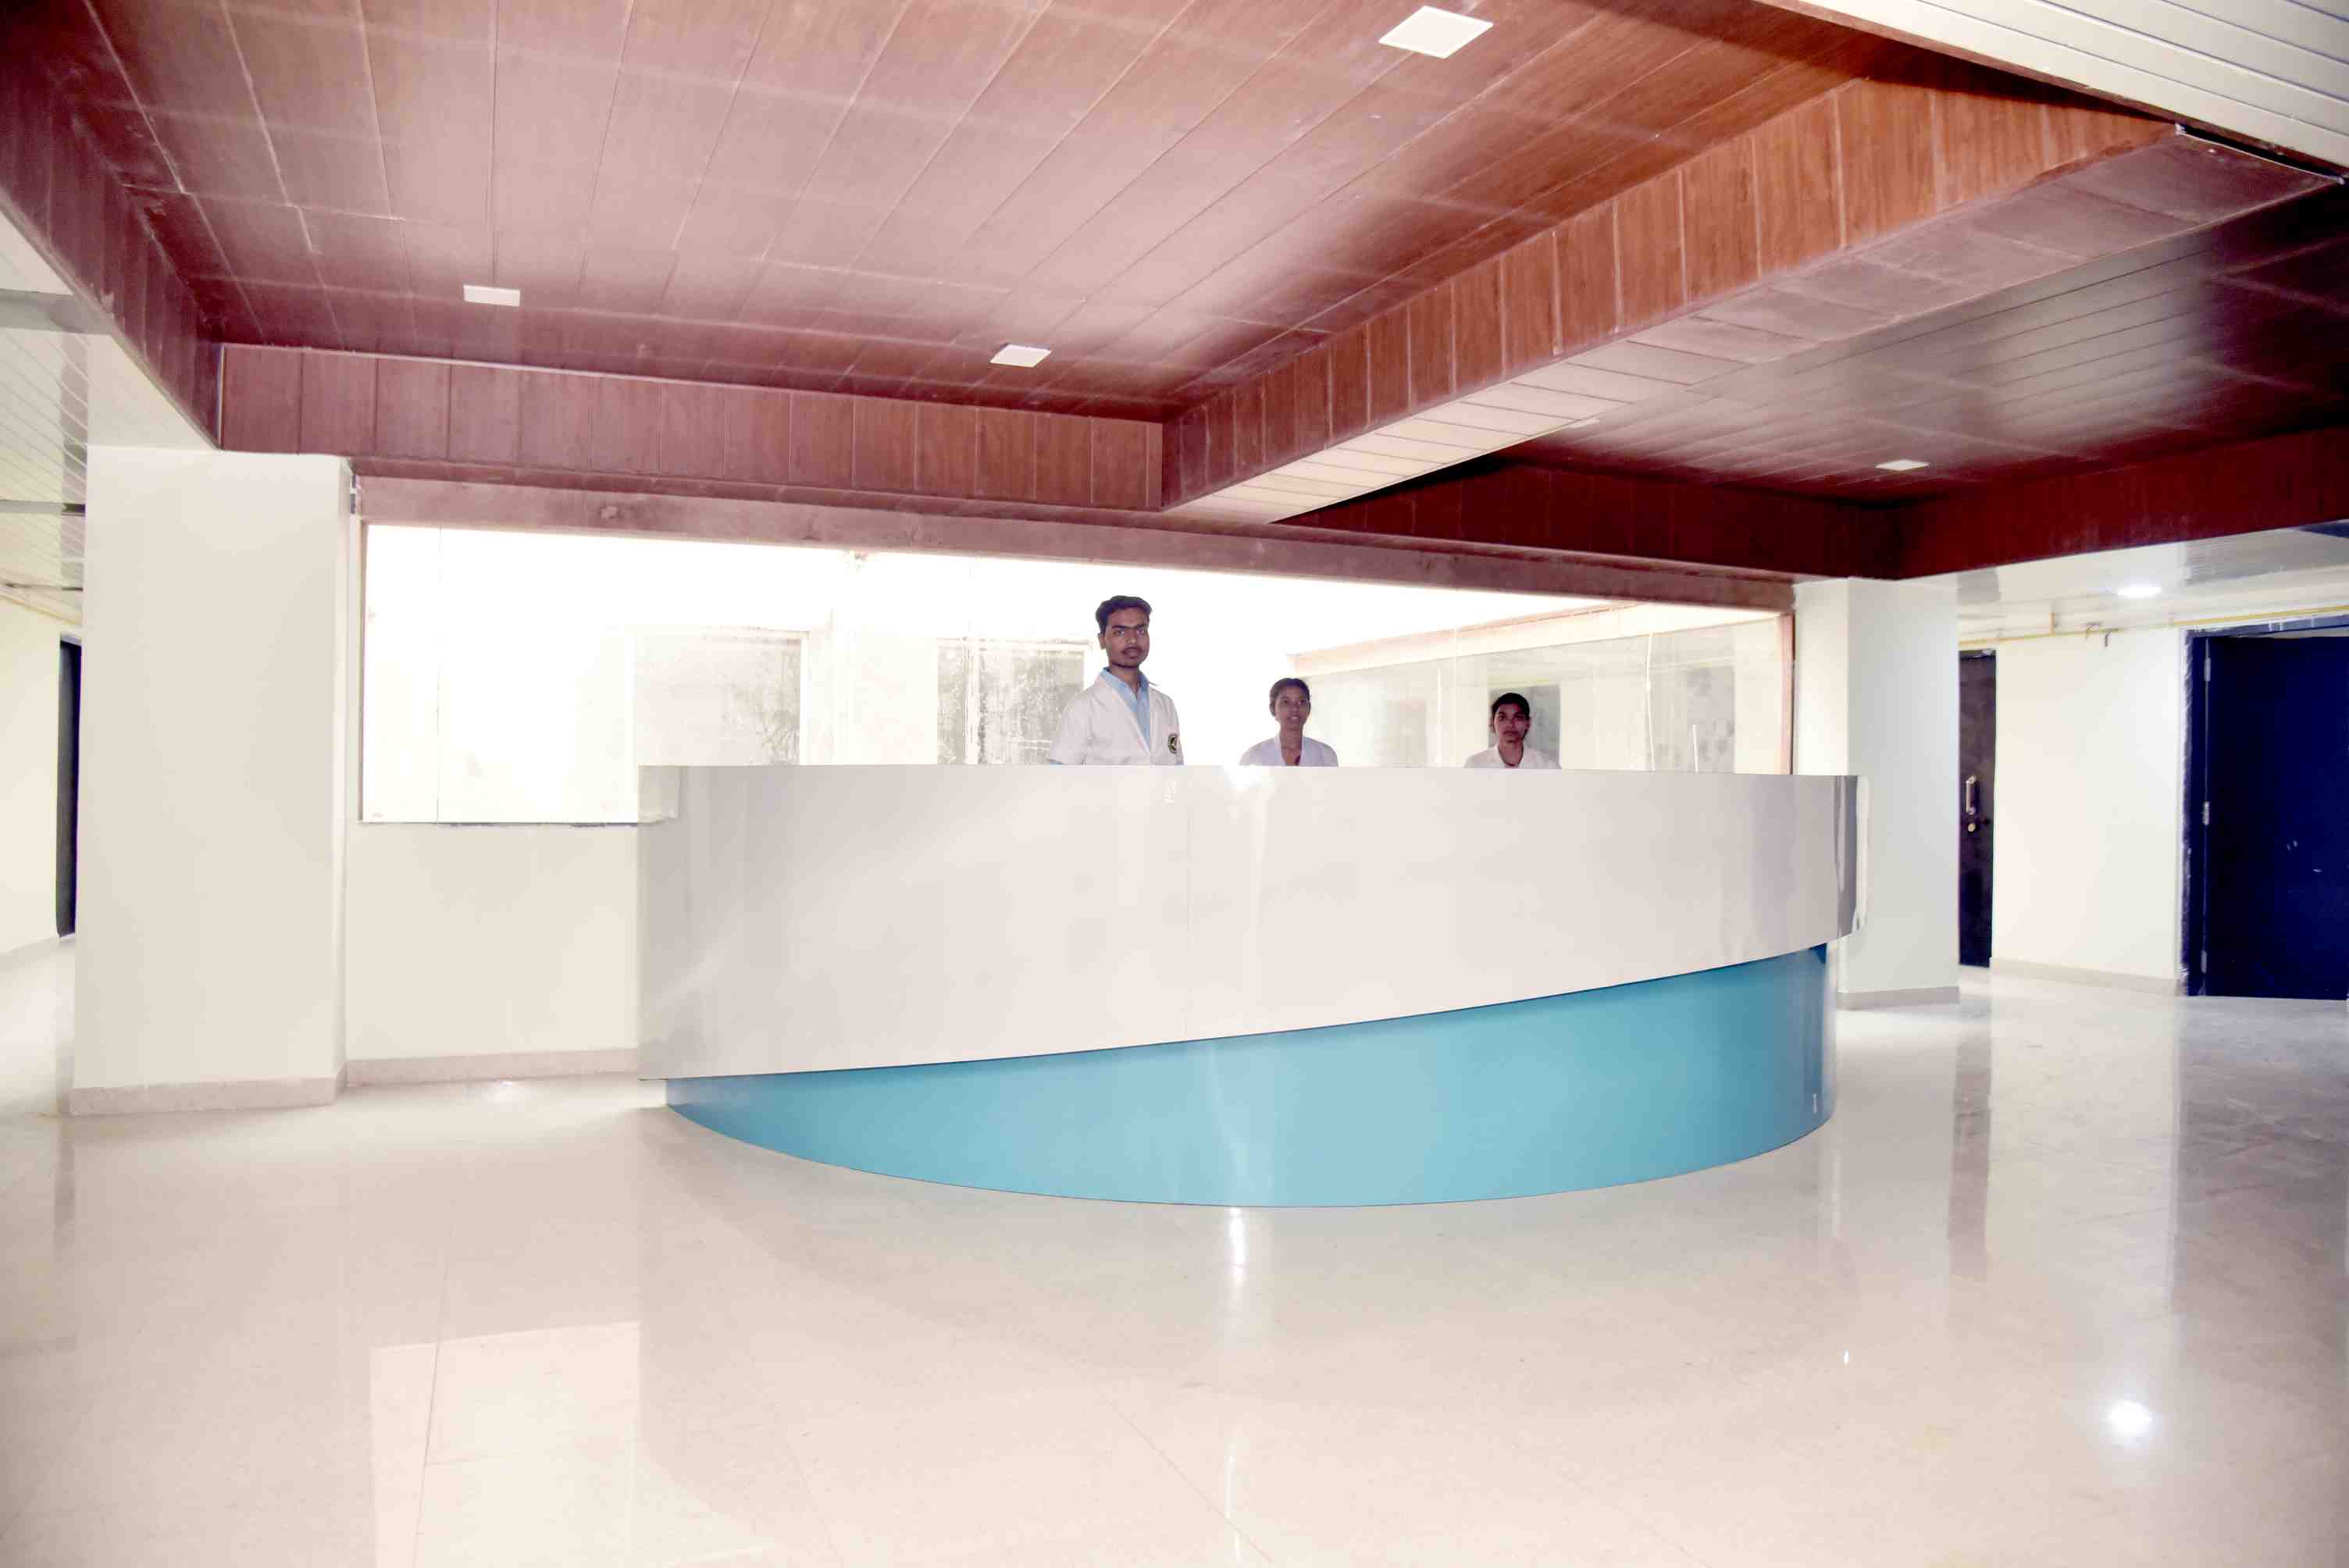 Reception Image of Mims Hospital in Patna